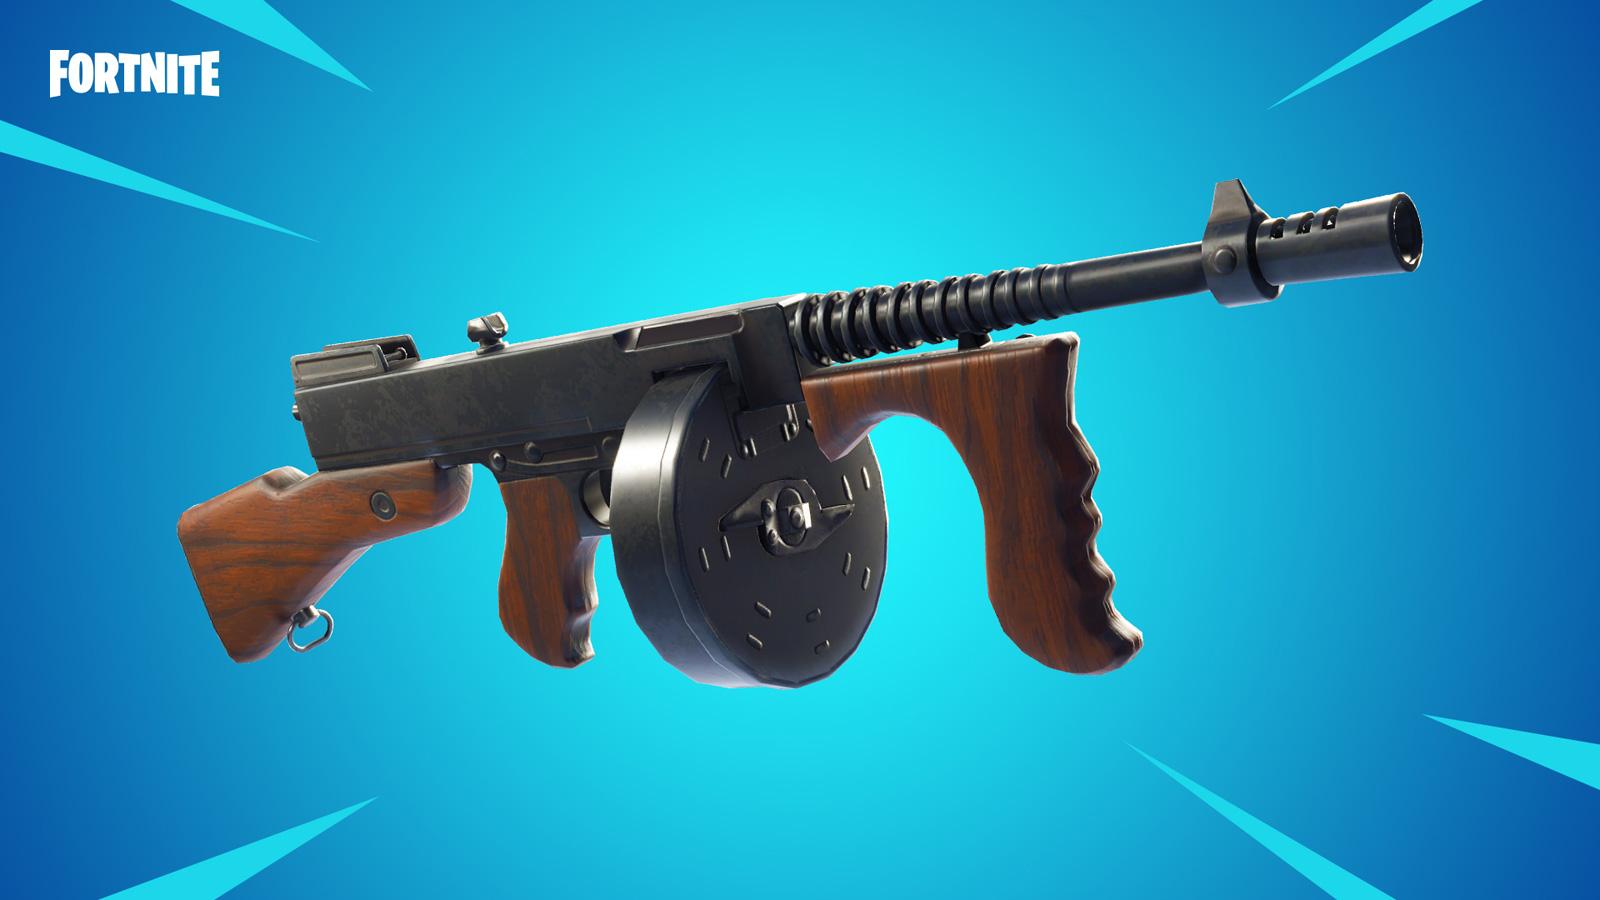 The Drum Gun was "vaulted" in an update to Fortnite